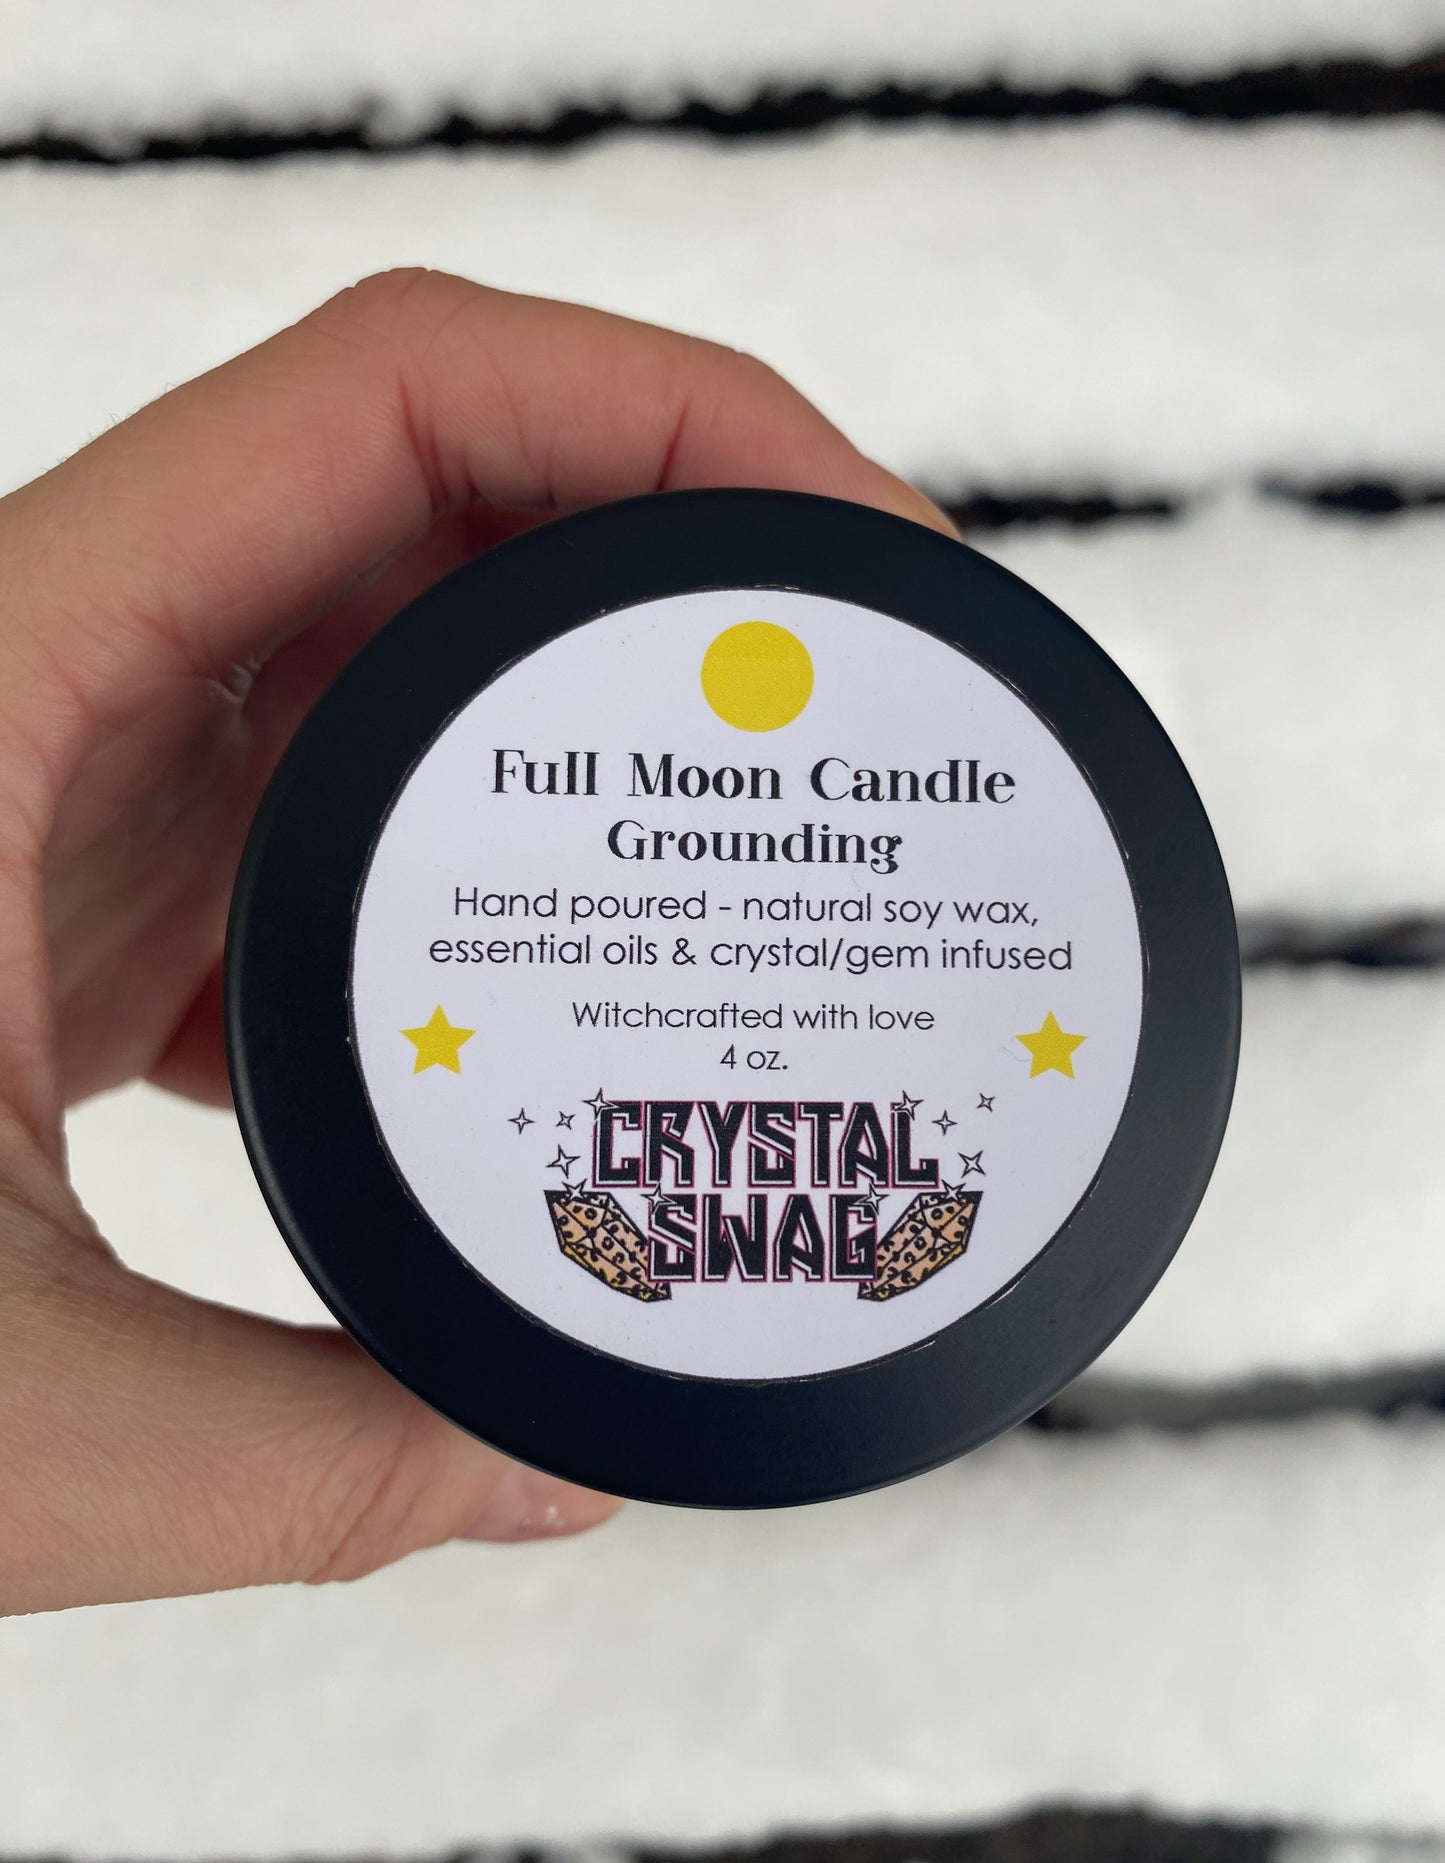 Full Moon Candles